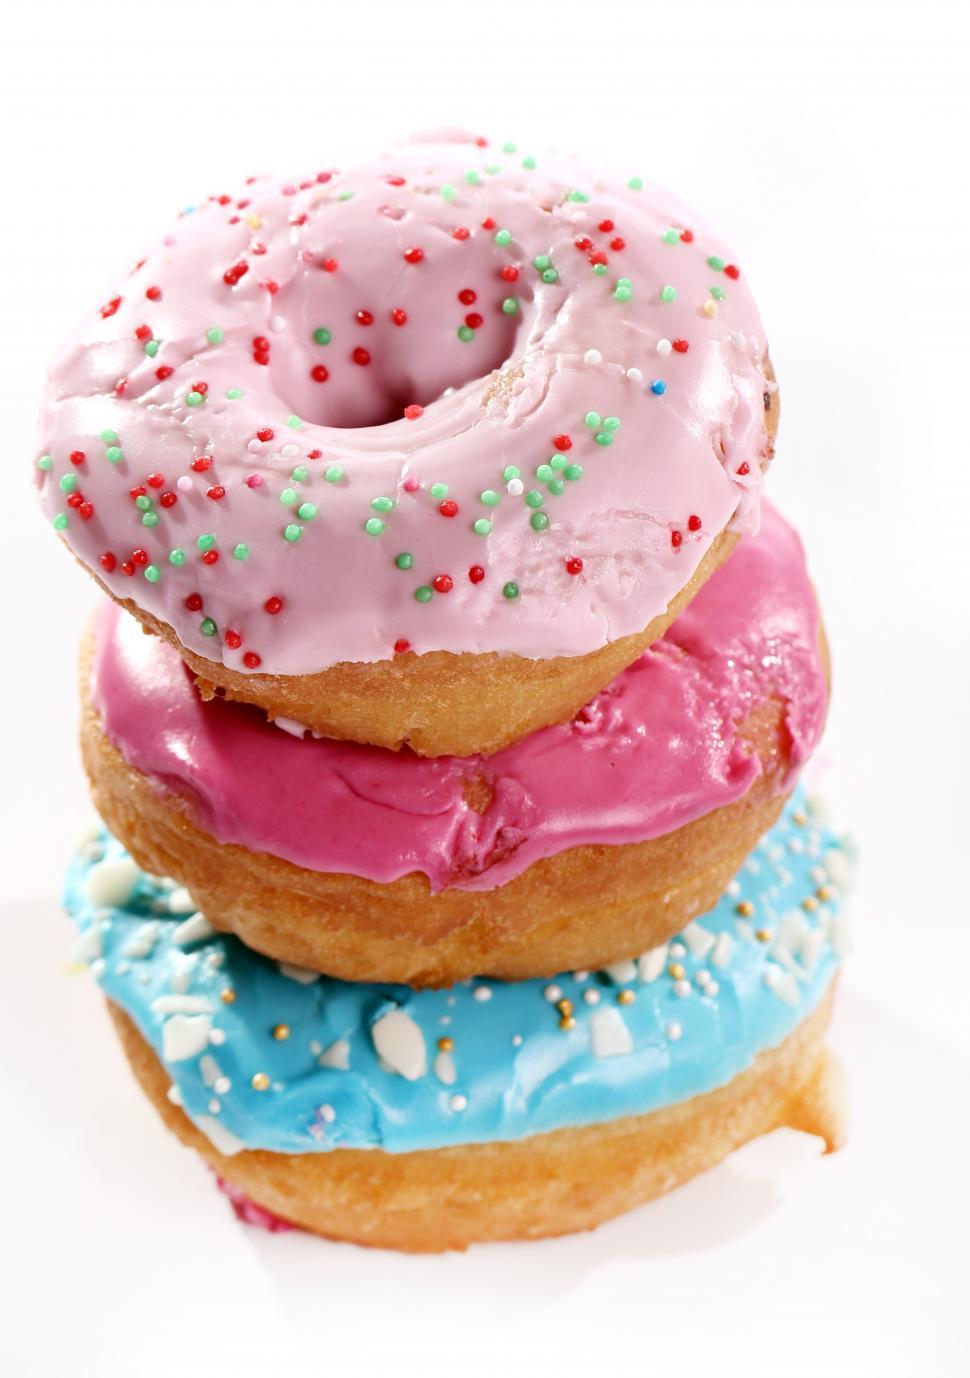 Free Image of Three tasty donuts stacked 